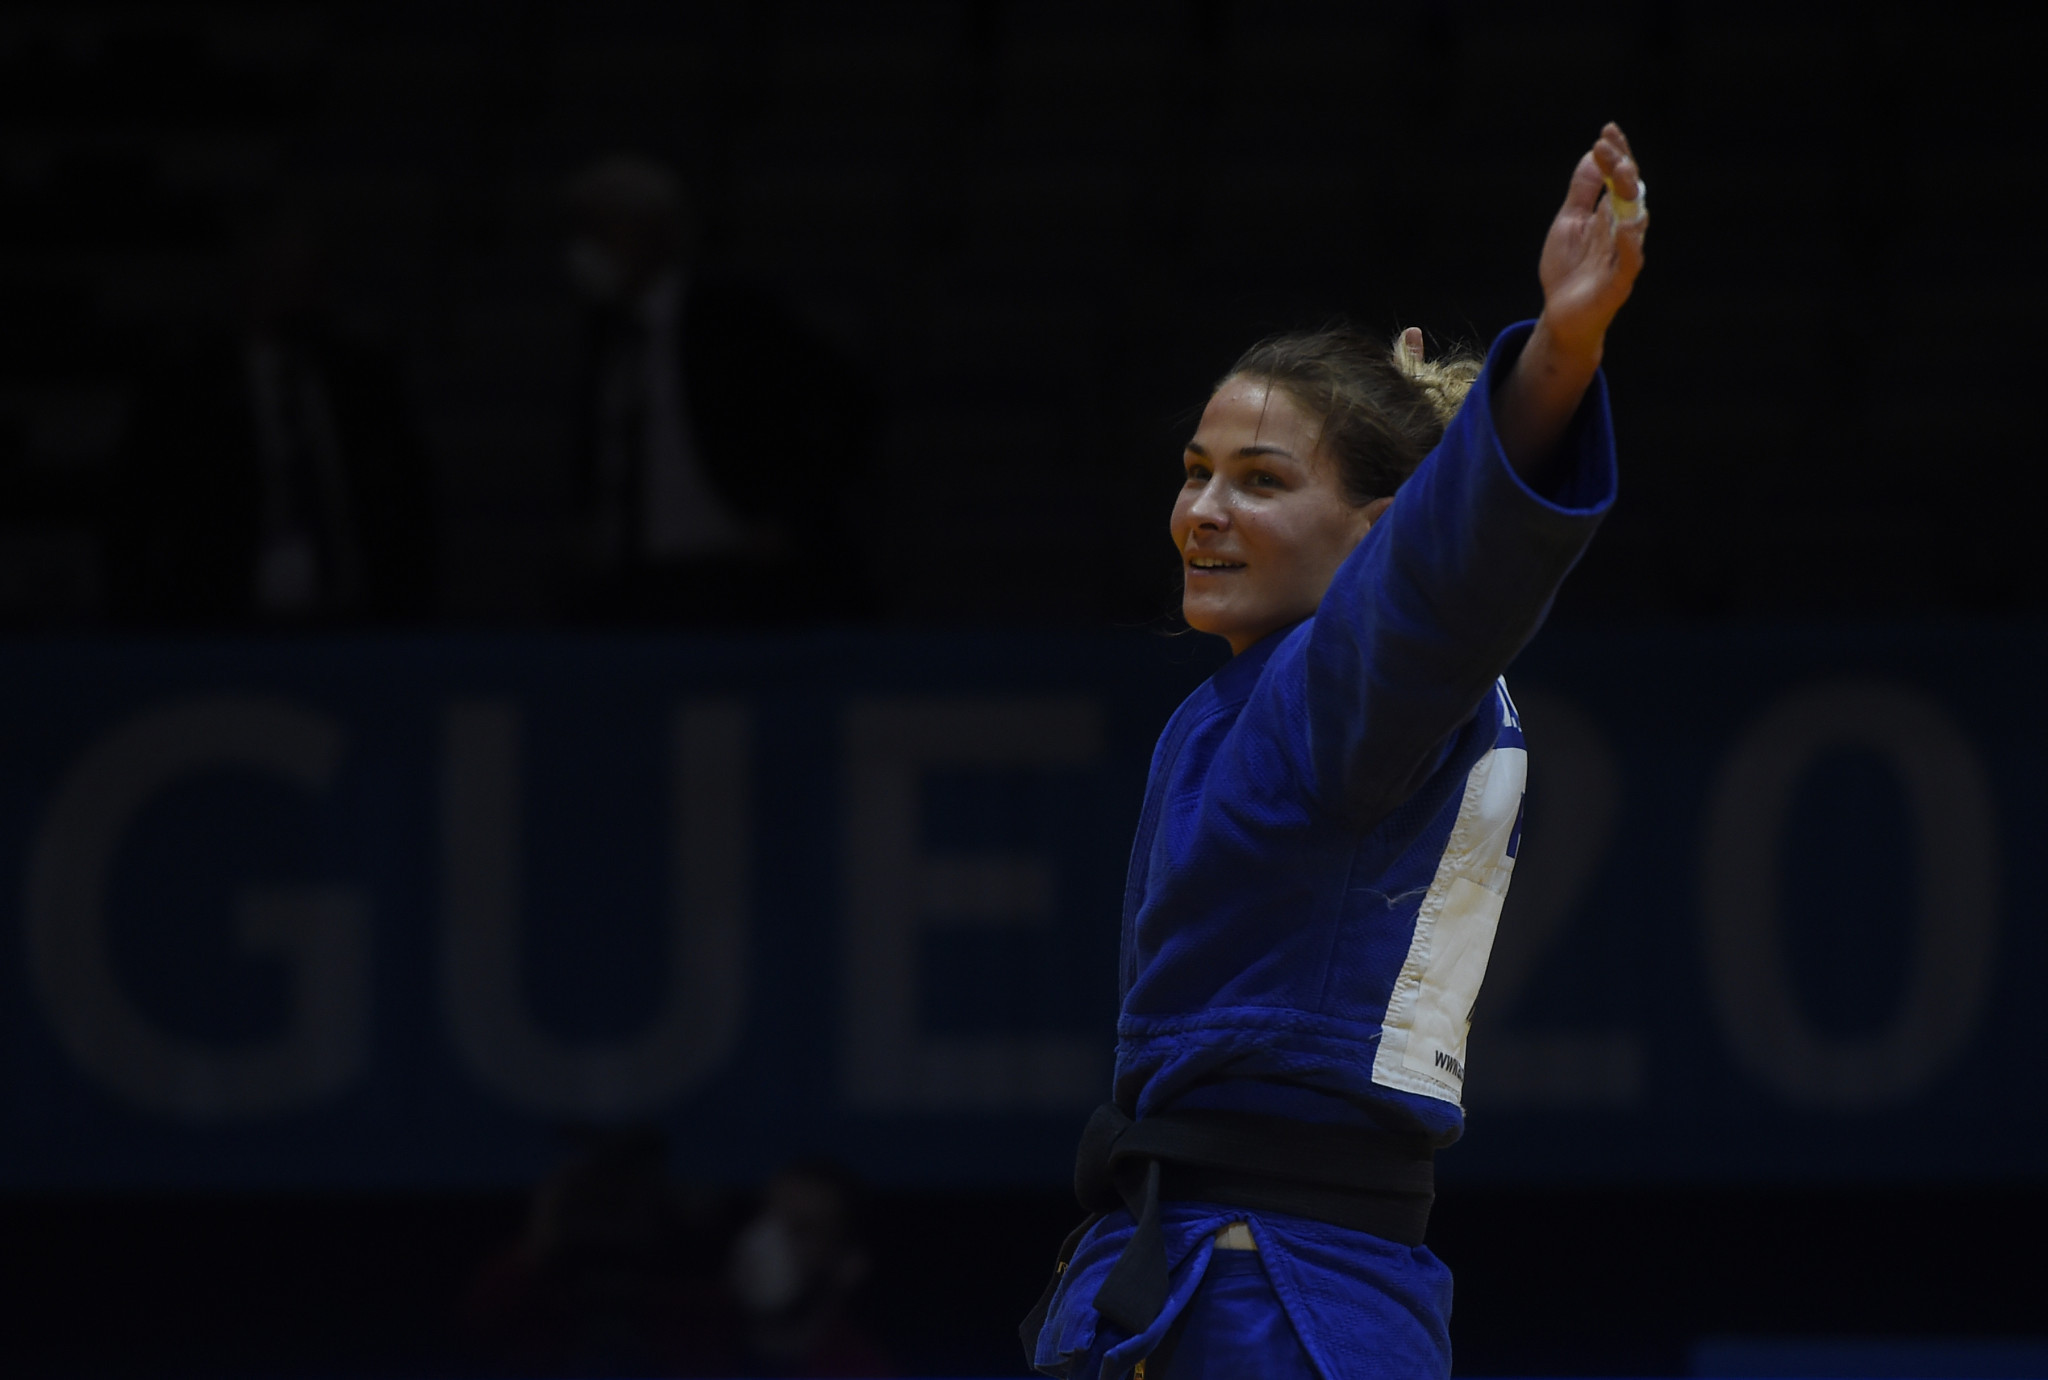 Hungary's Hedvig Karakas defeated Portugal's Telma Monteiro in the women's under-57kg category final at the 2020 European Judo Championships held in Prague ©Getty Images
